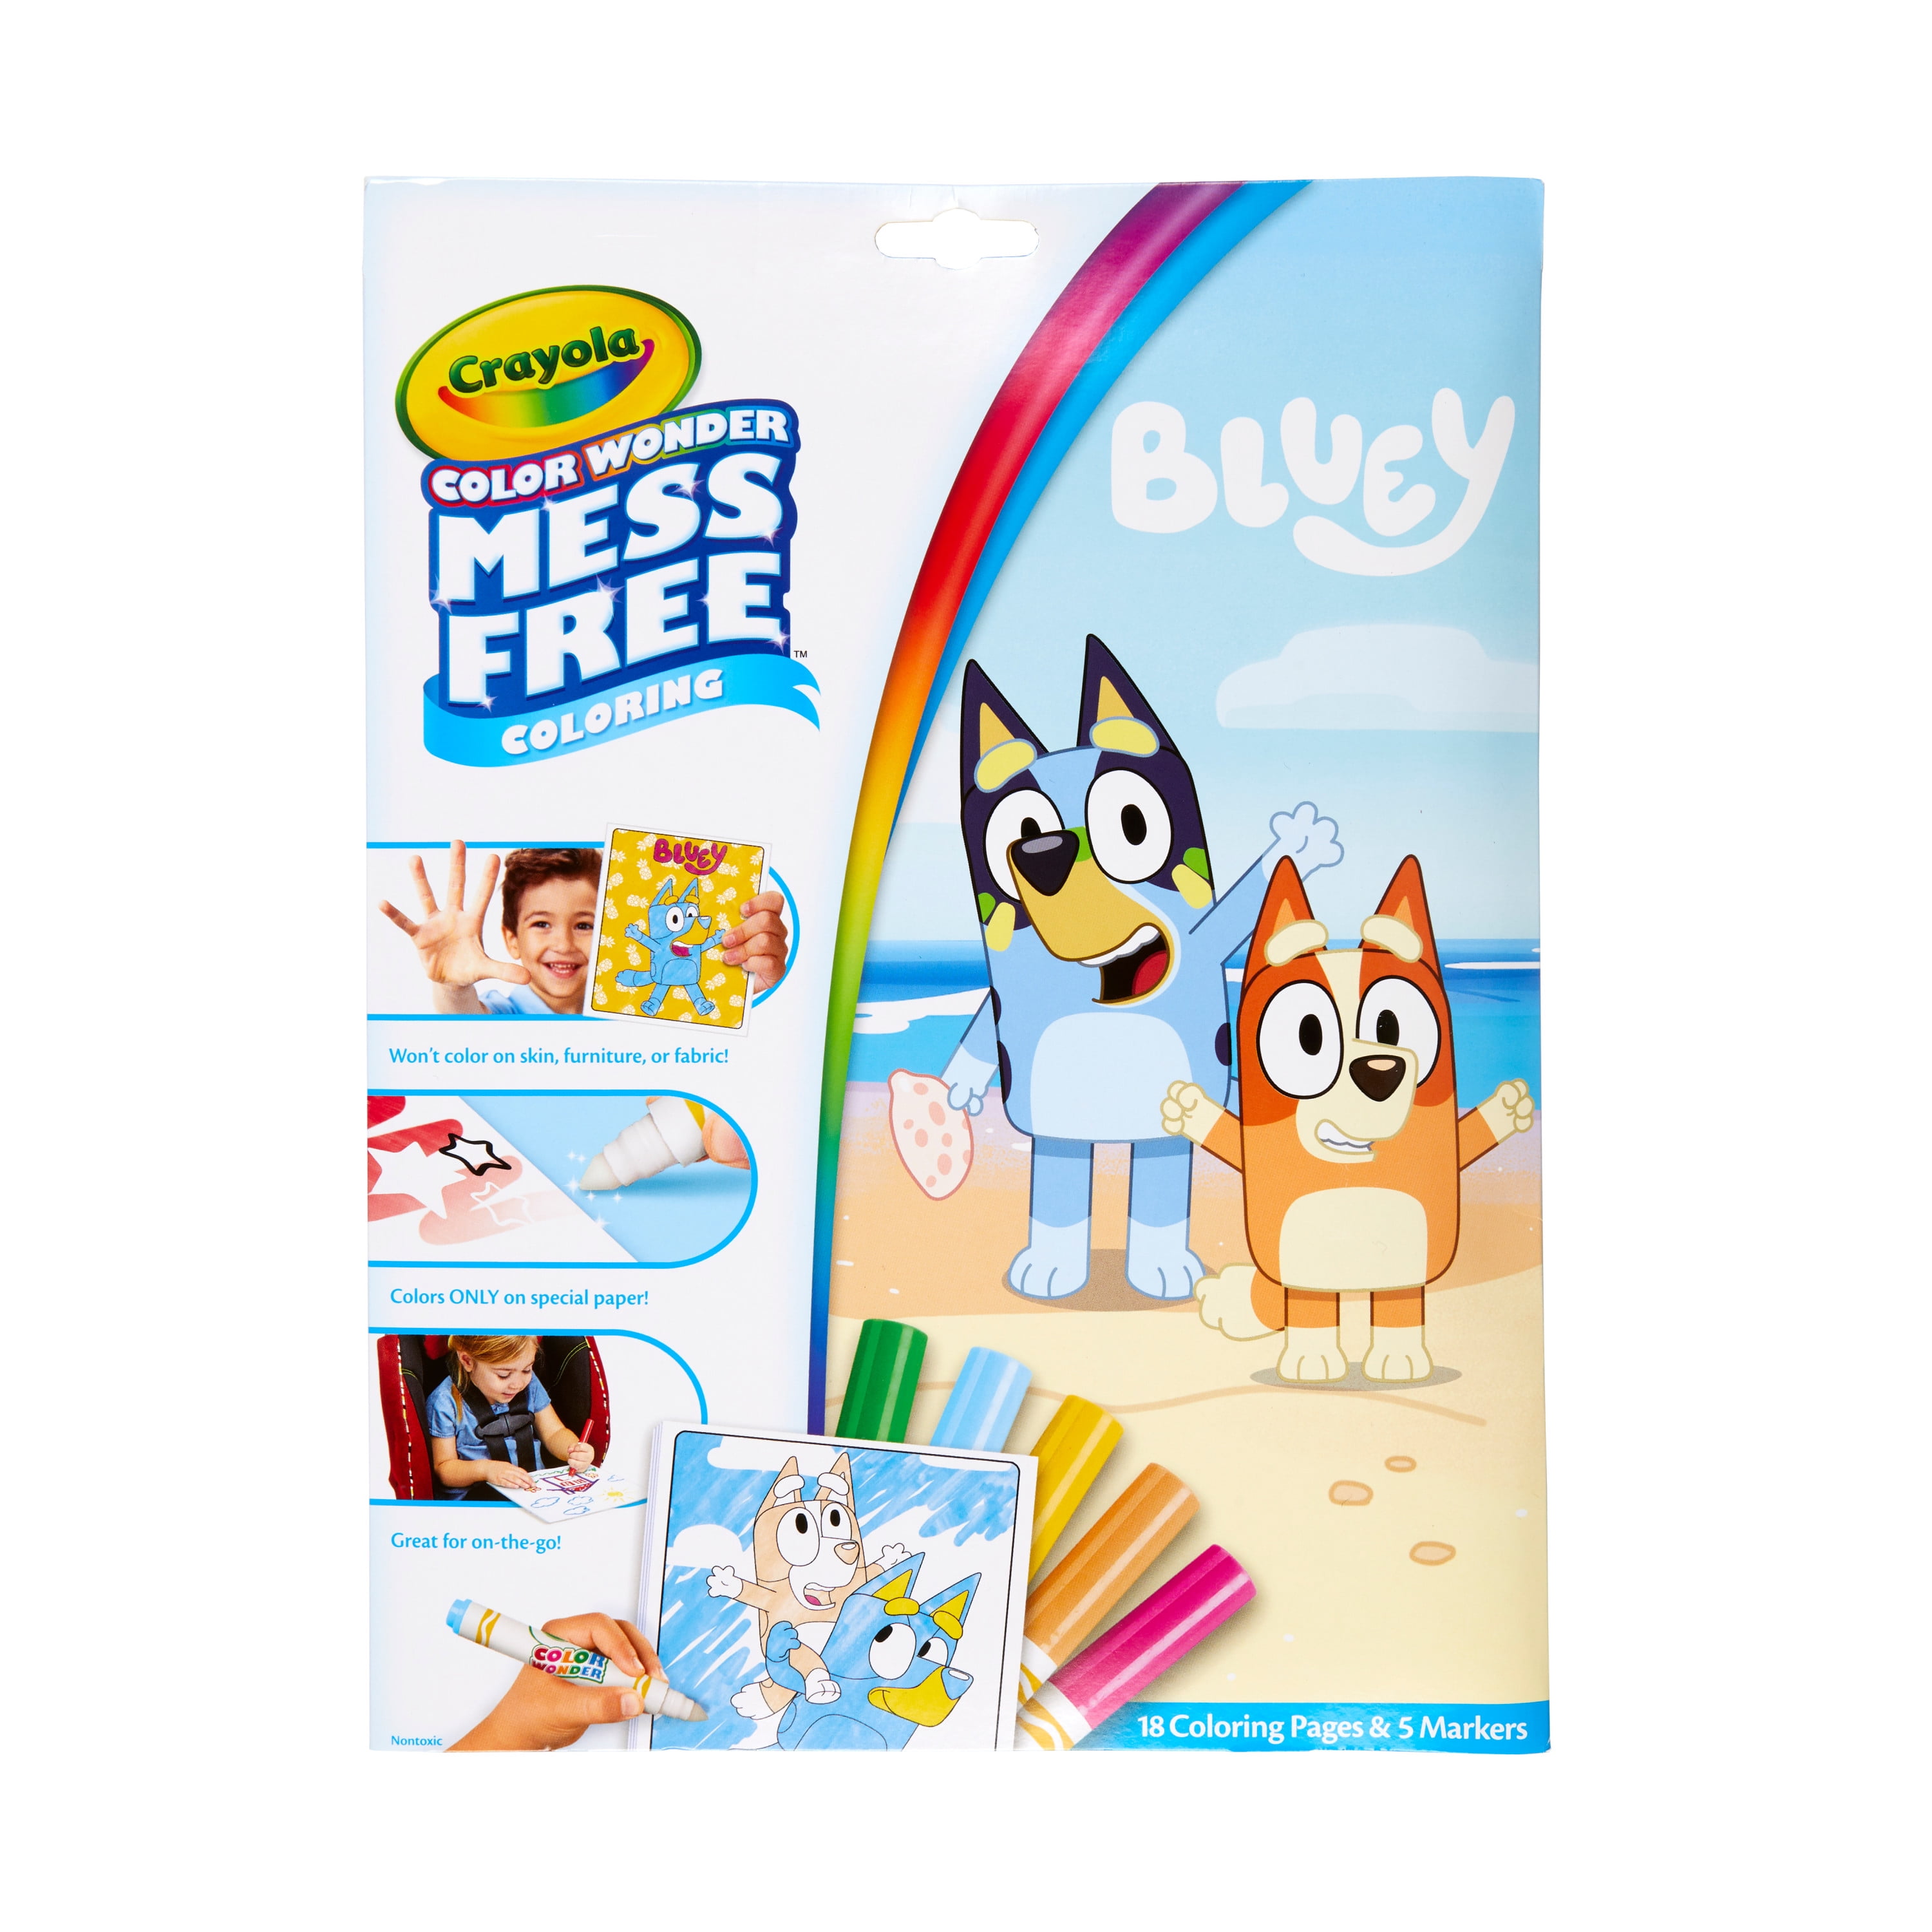 Crayola Color Wonder Mess Free Bluey Coloring Set, 18 pages, Gifts for Beginner Child